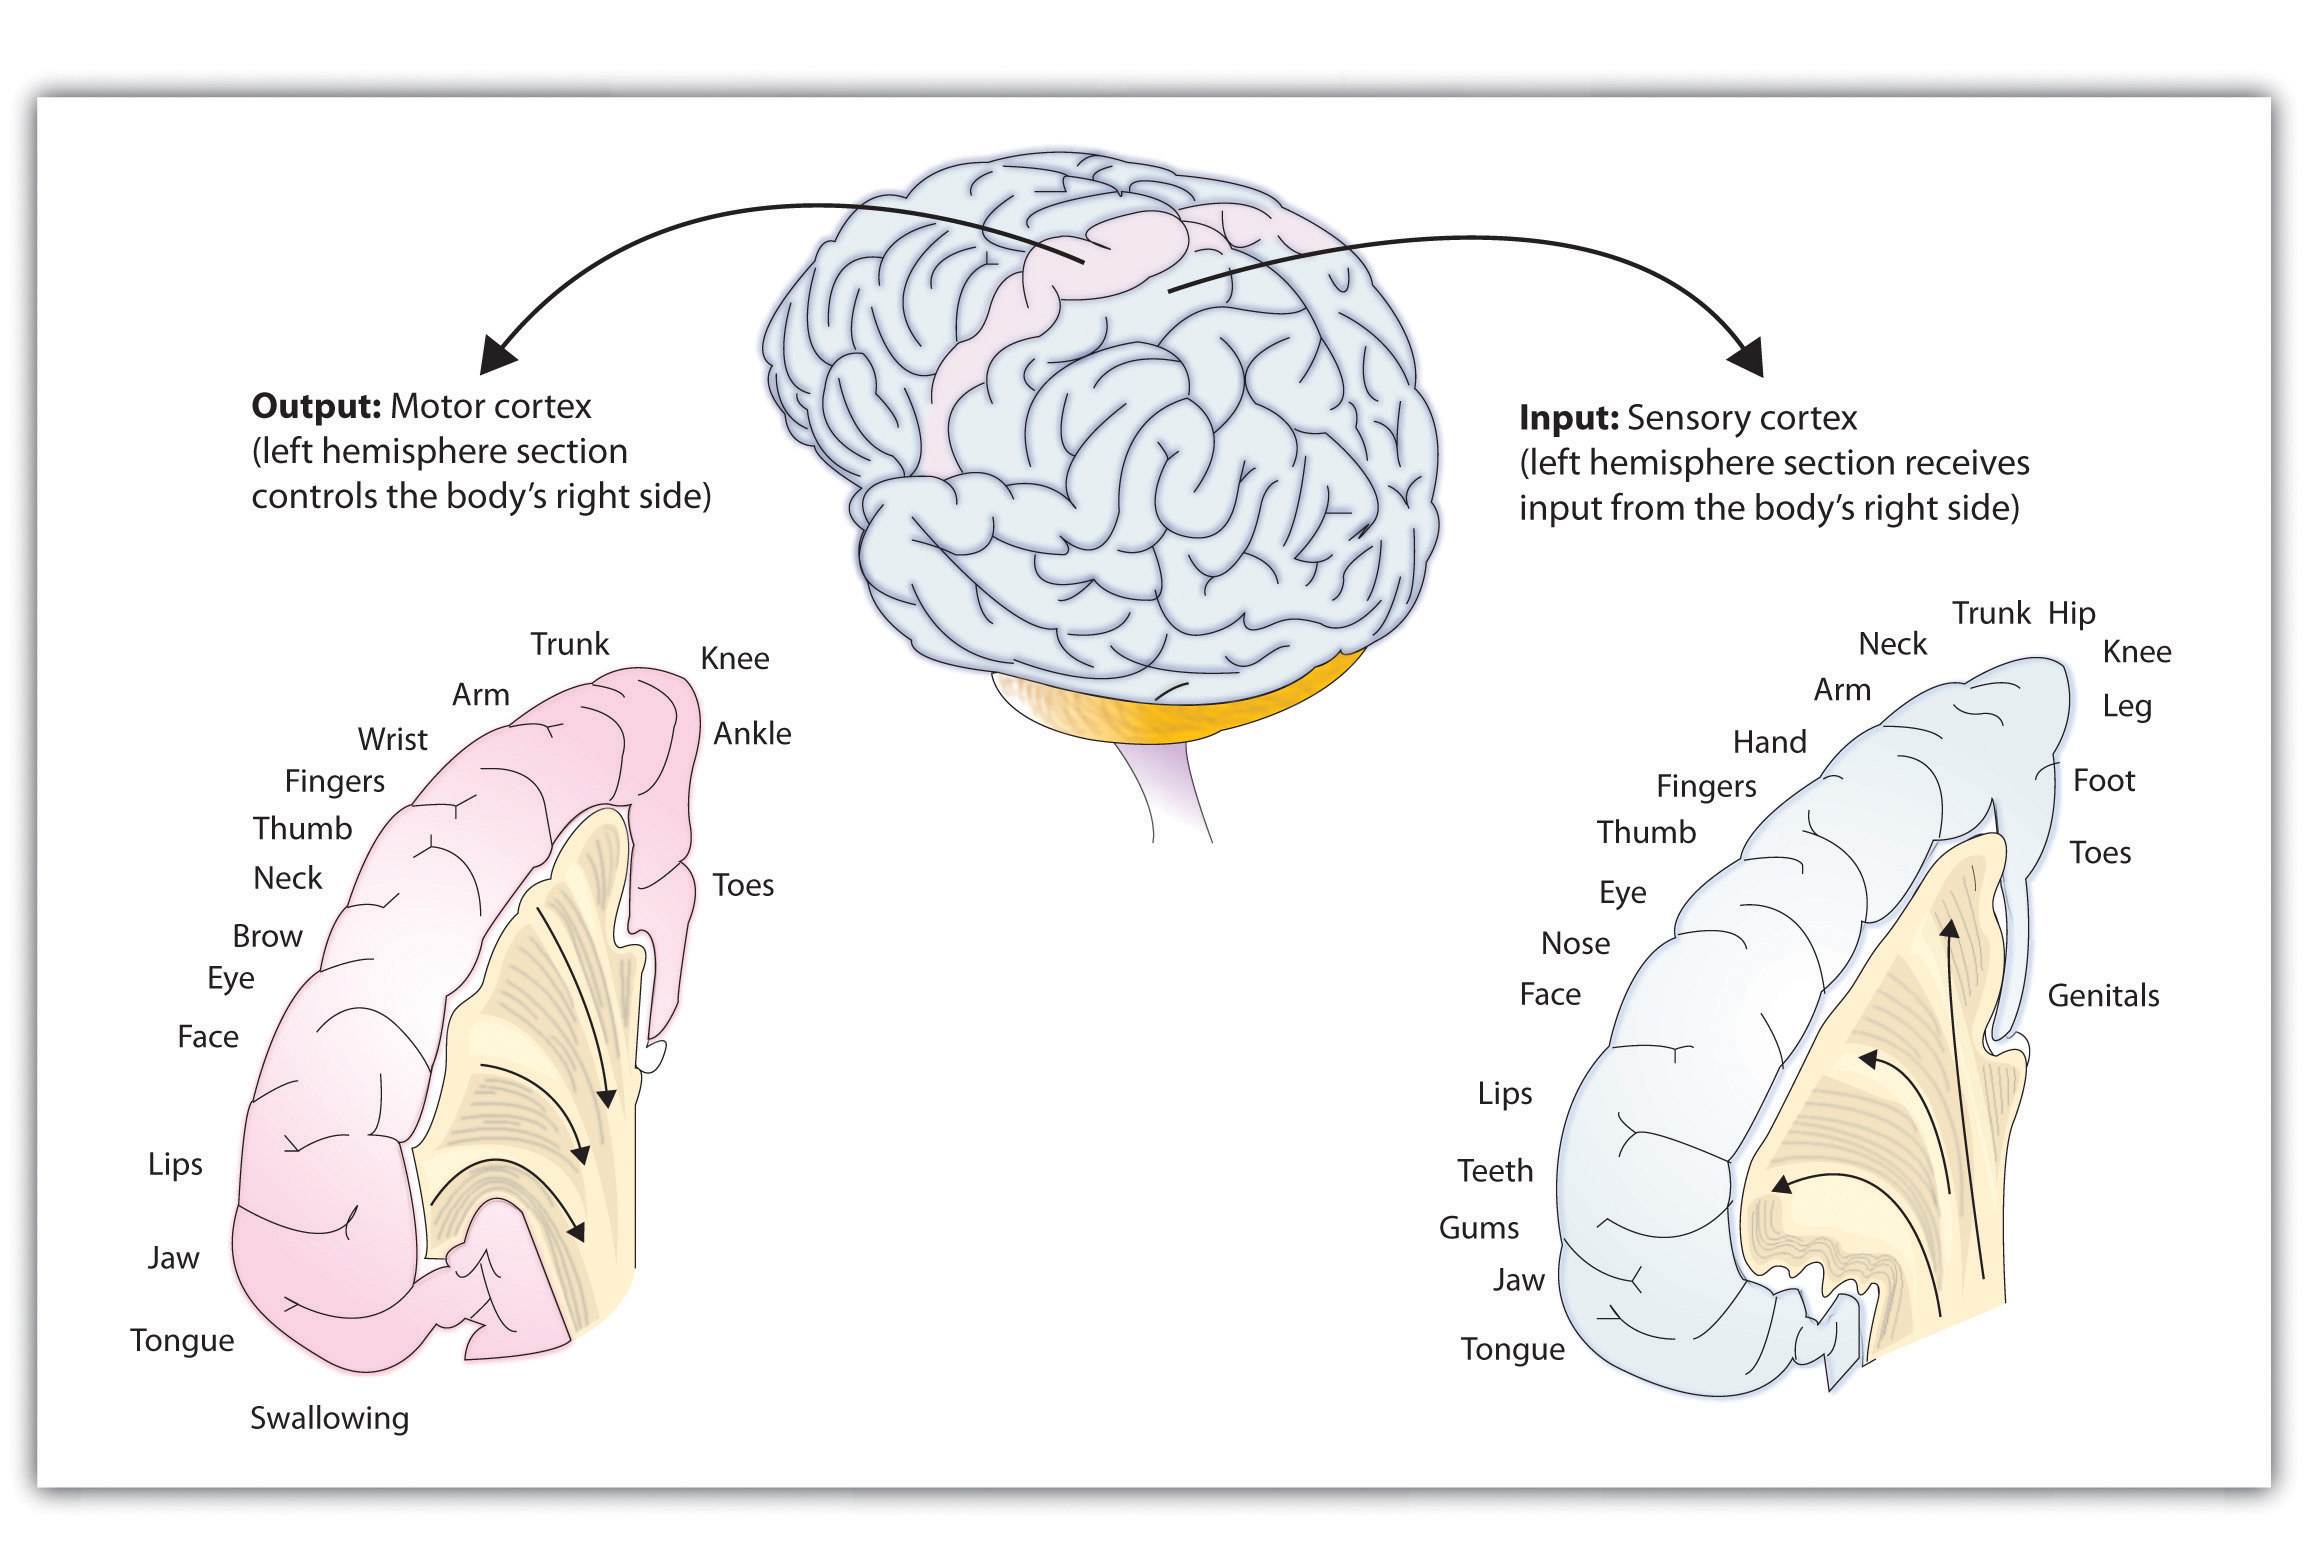 Drawing of cerebral cortex highlighting primary sensory and motor cortices showing maps of body areas served by each.